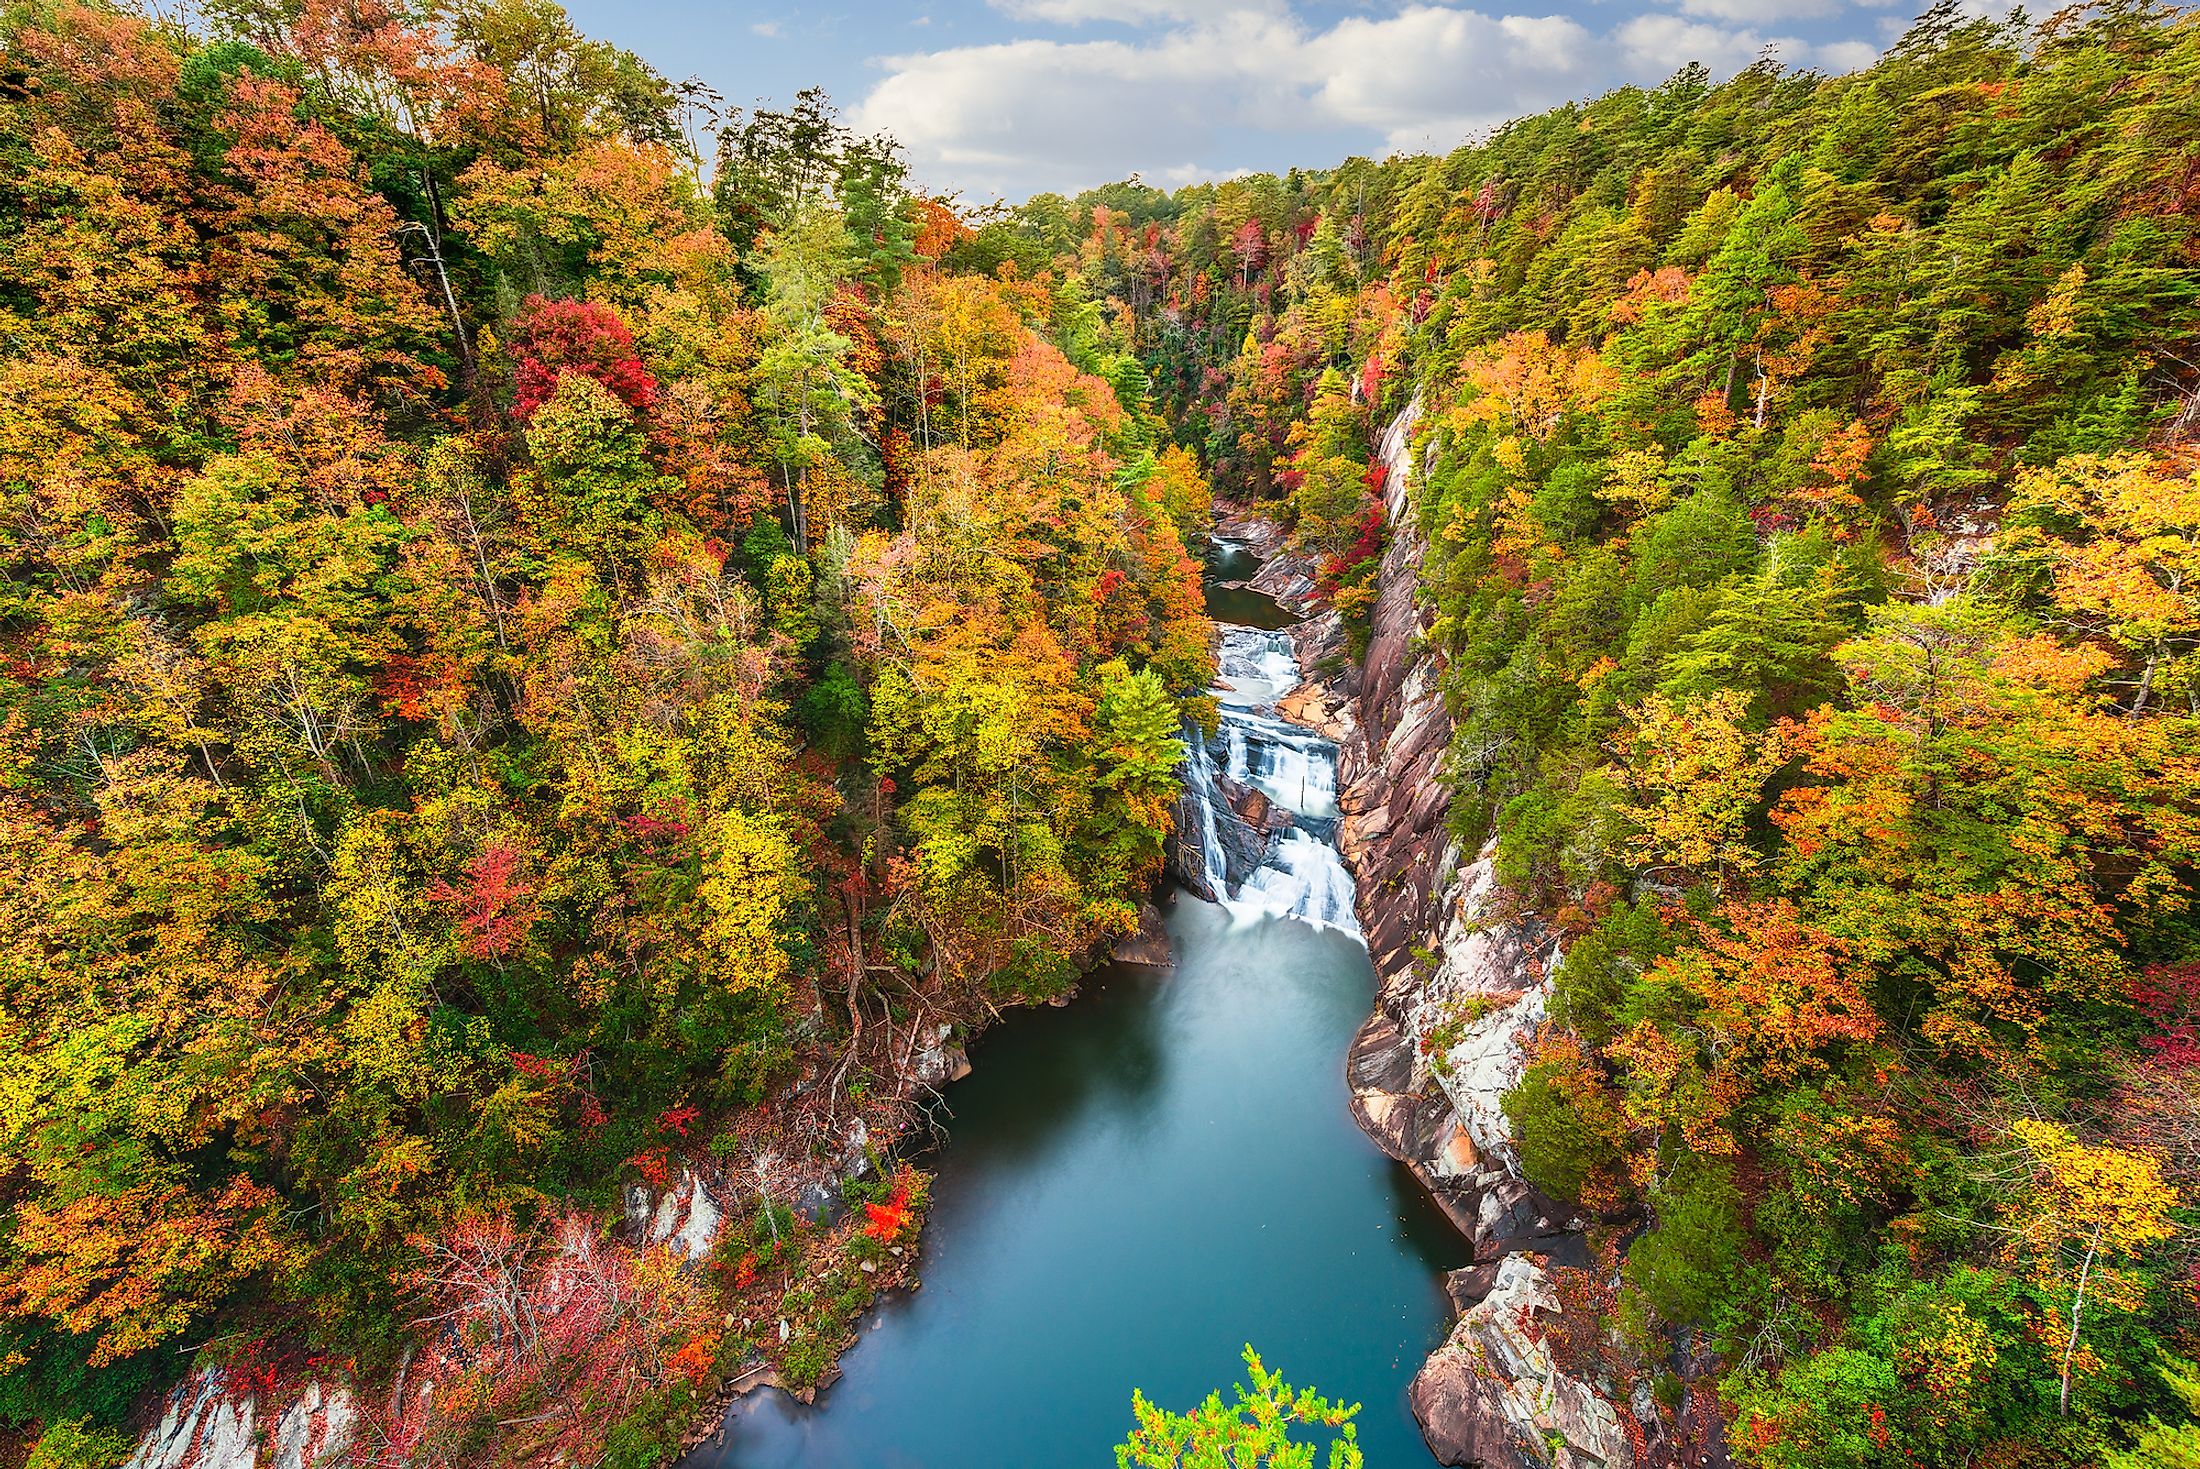 Gorgeous fall colors at the Tallulah Gorge State Park.